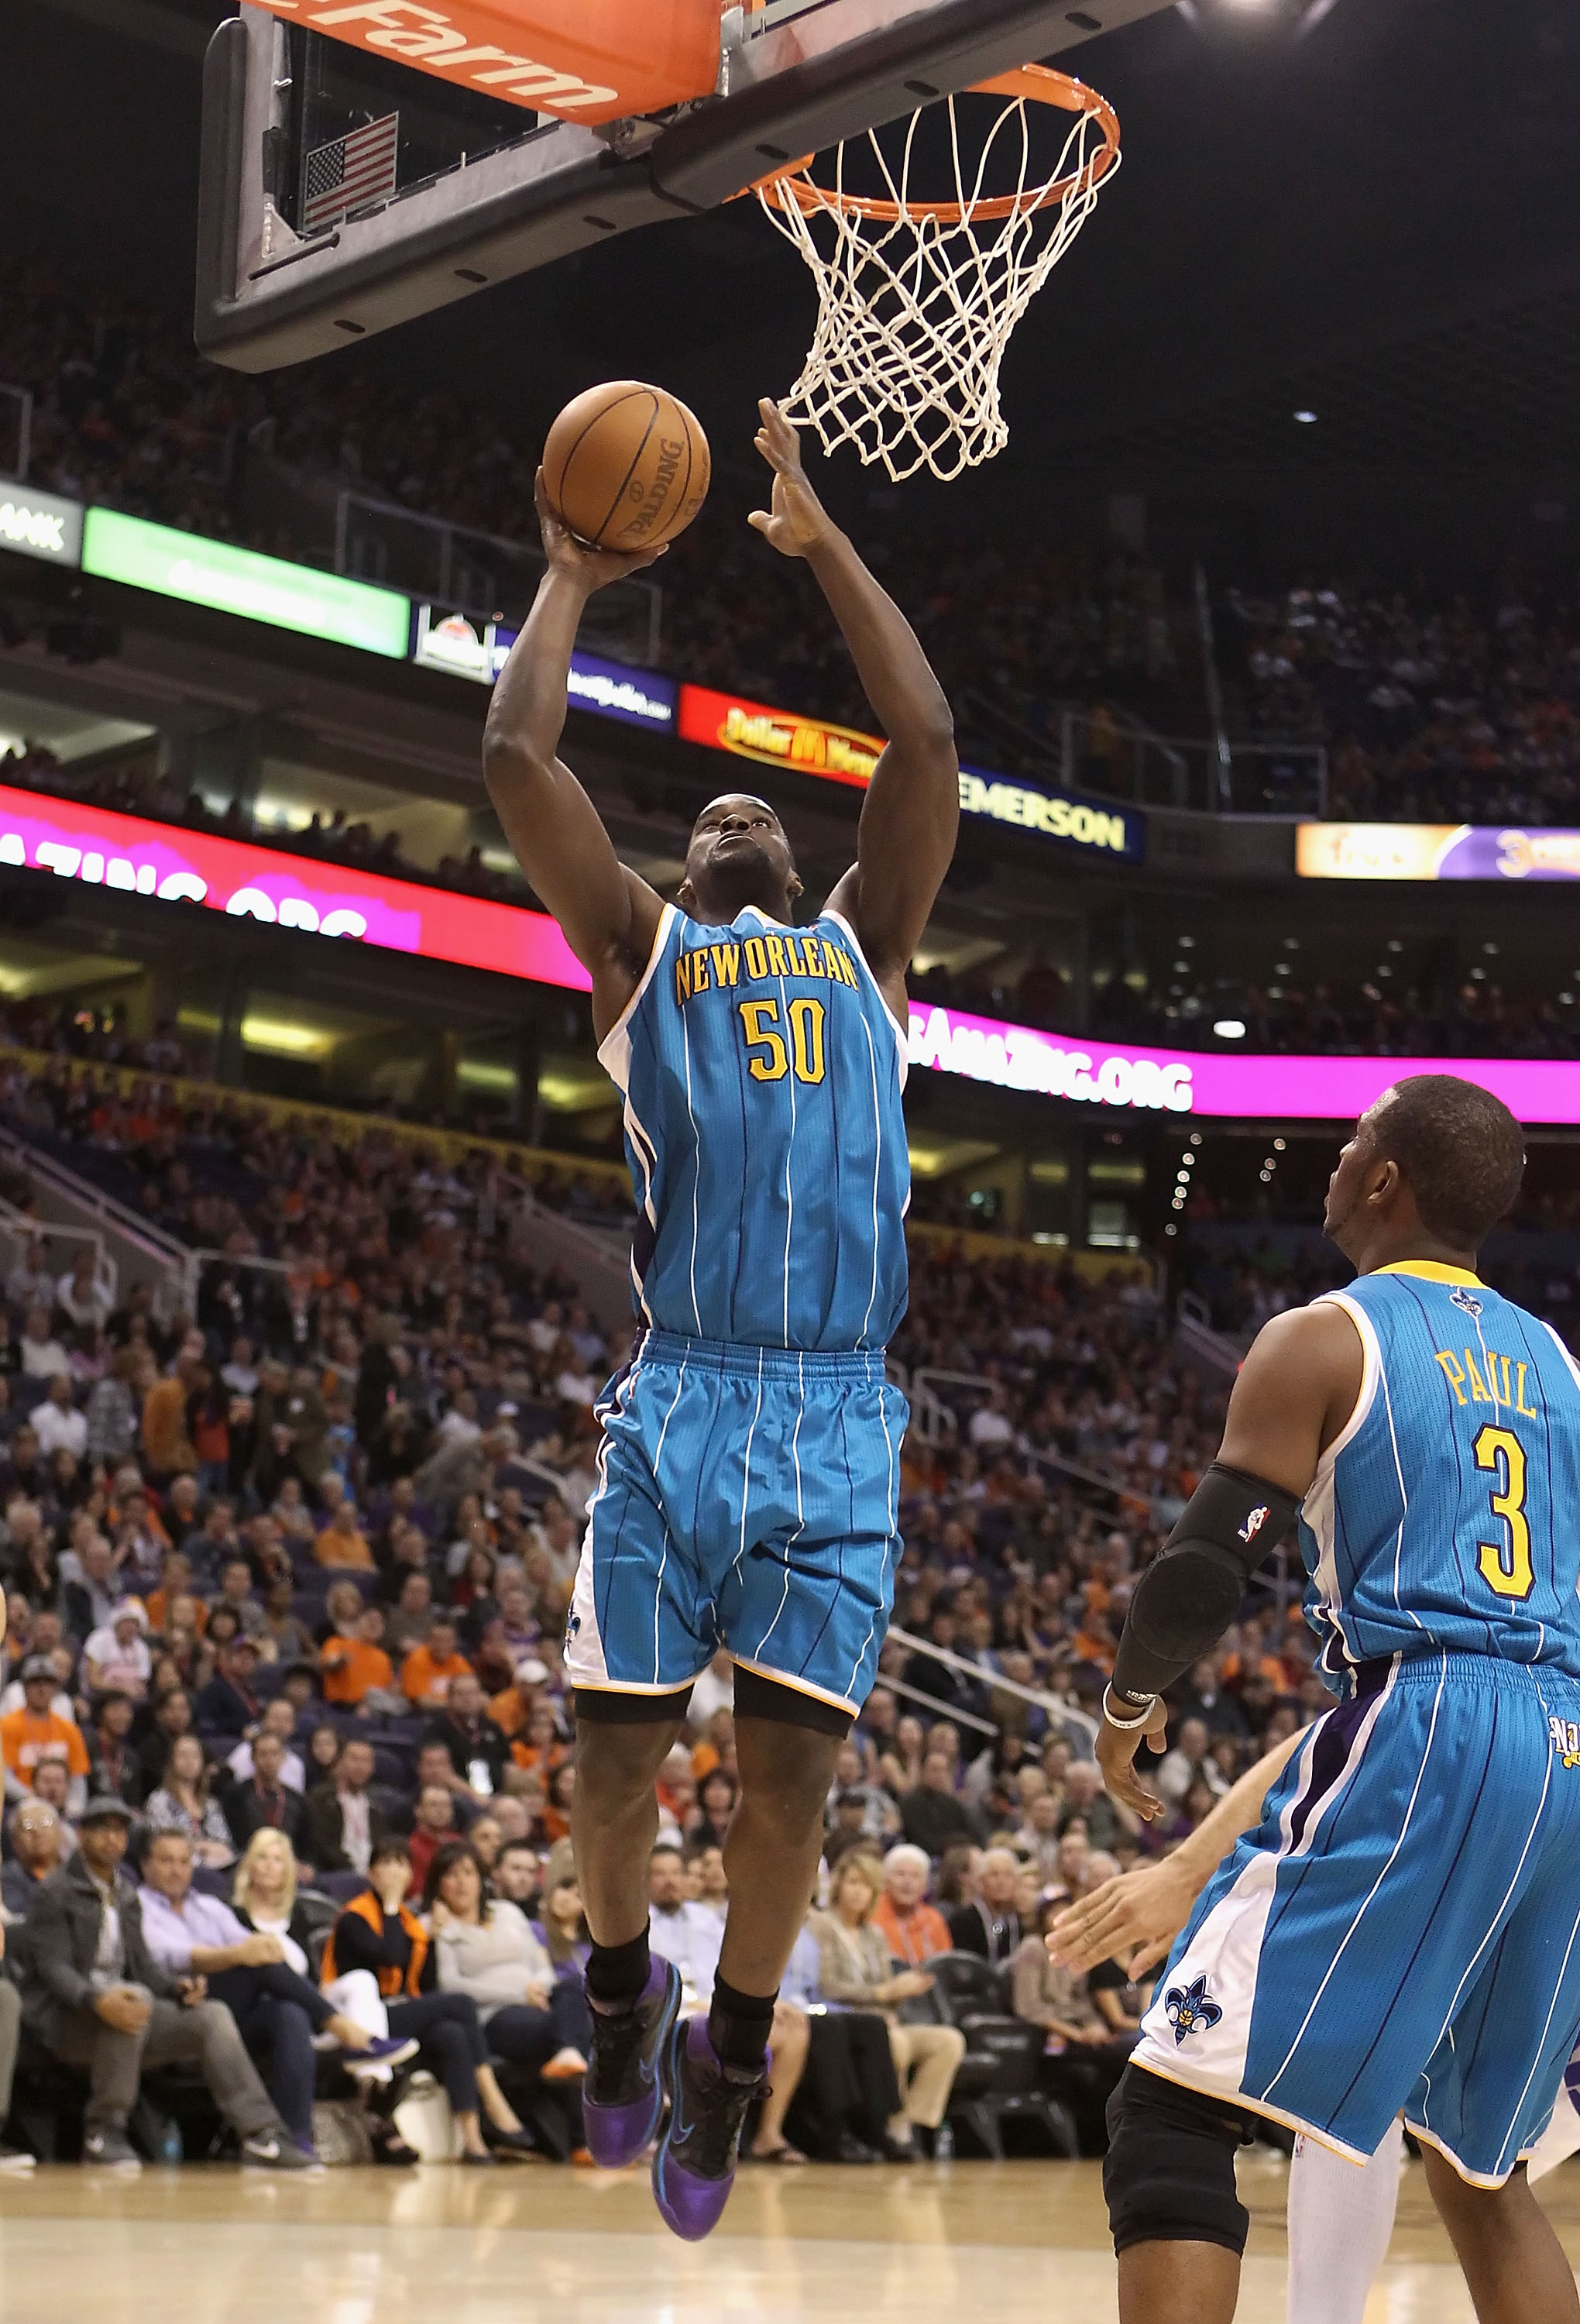 PHOENIX, AZ - JANUARY 30:  Emeka Okafor #50 of the New Orleans Hornets puts up a shot against the Phoenix Suns during the NBA game at US Airways Center on January 30, 2011 in Phoenix, Arizona.  NOTE TO USER: User expressly acknowledges and agrees that, by